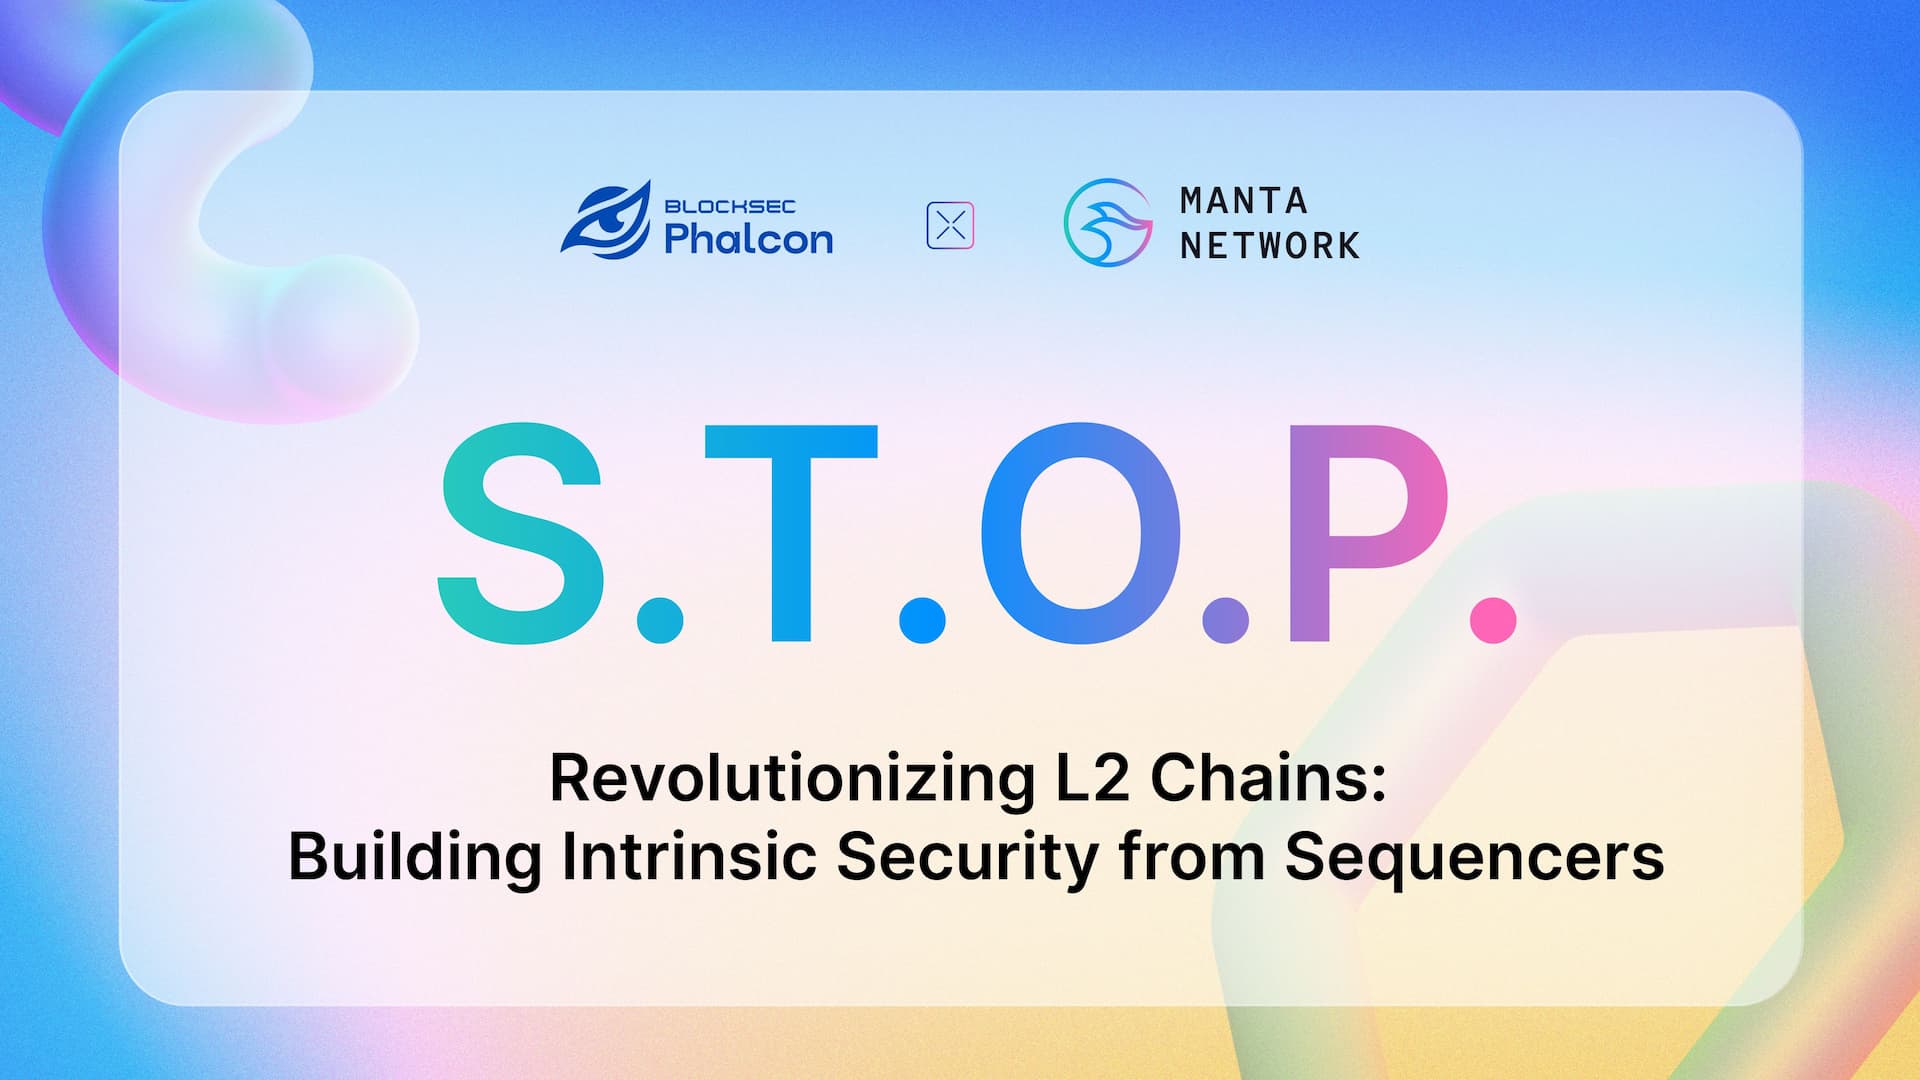 Revolutionizing L2 Chains: Building Intrinsic Security from Sequencers